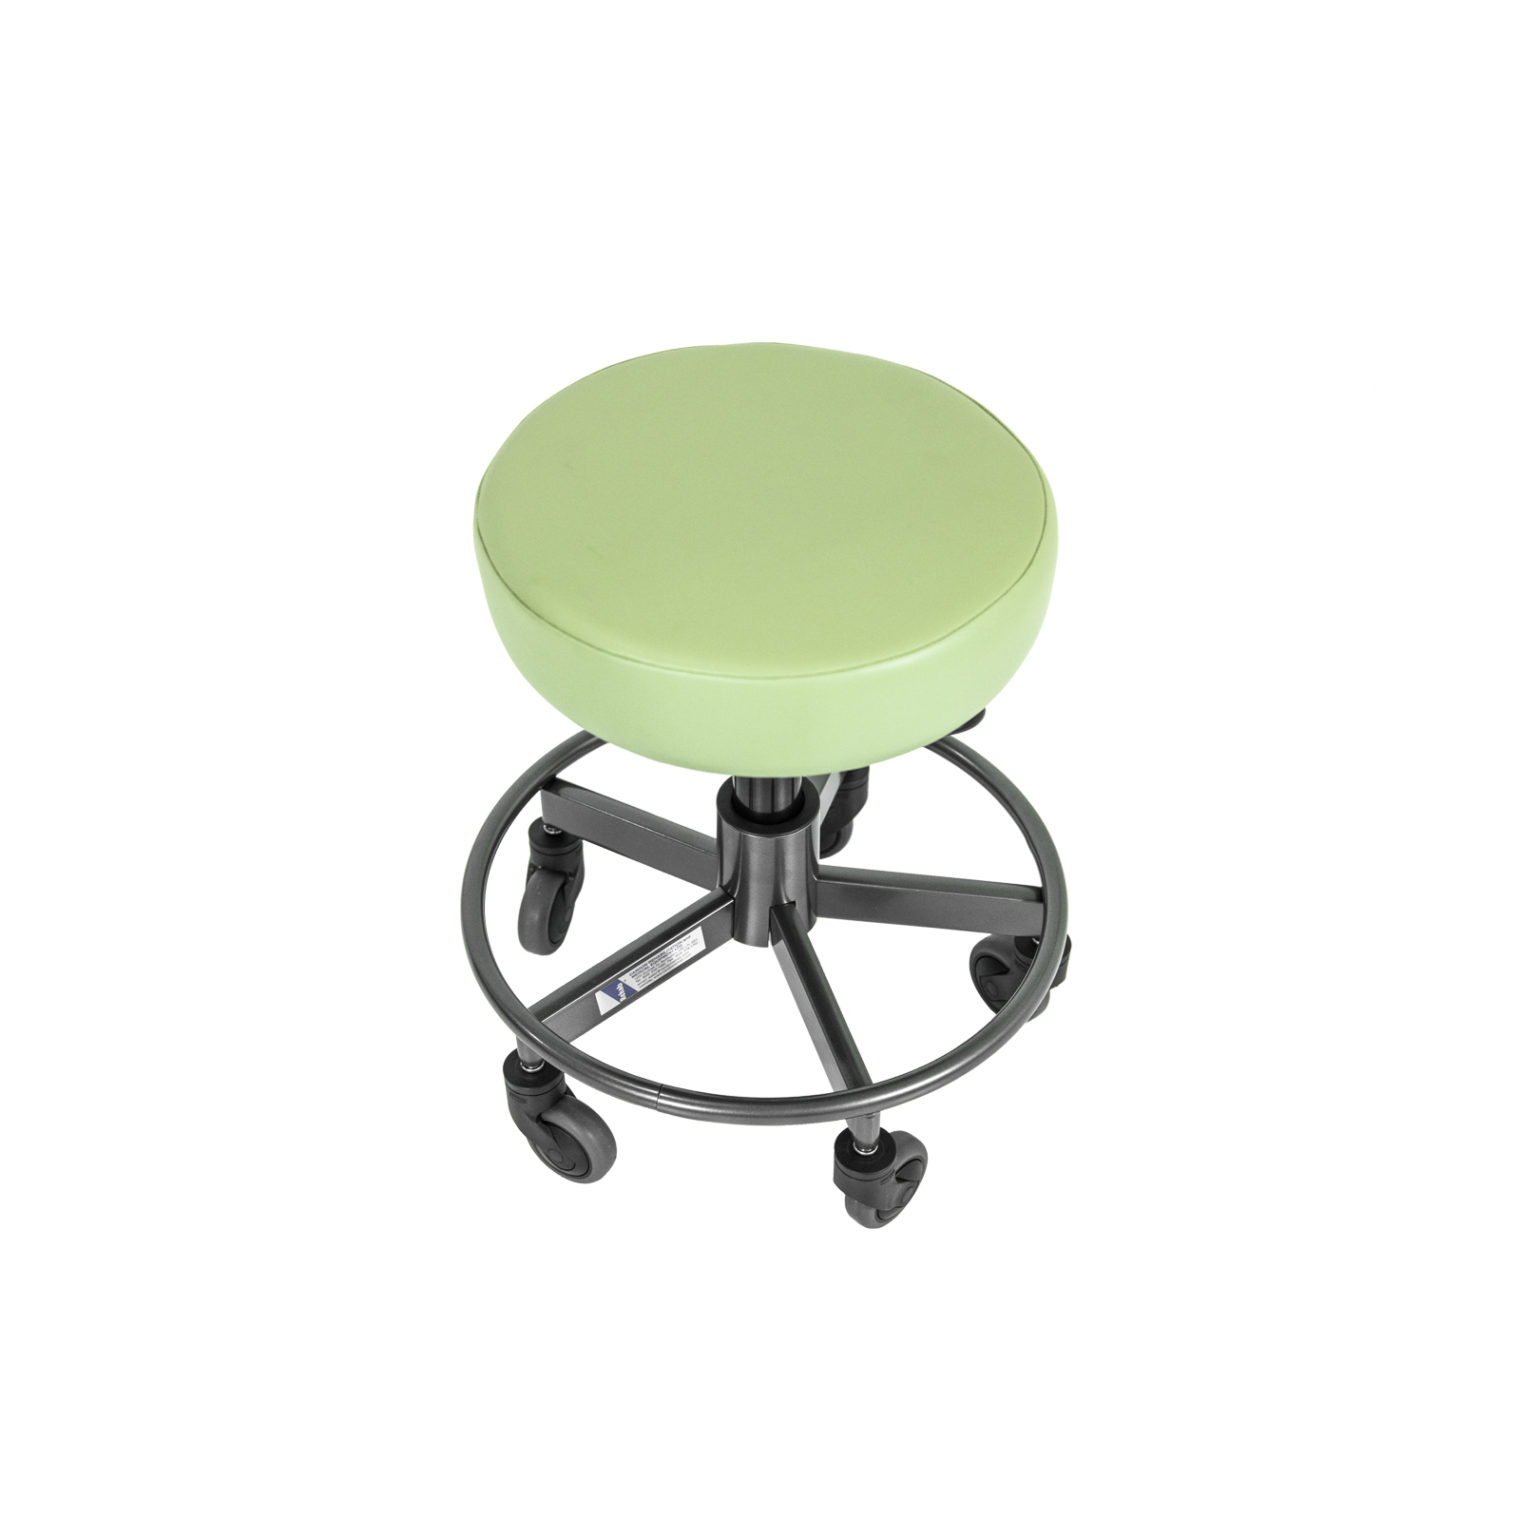 All Purpose Stool For Product Page Img 1536x1536 